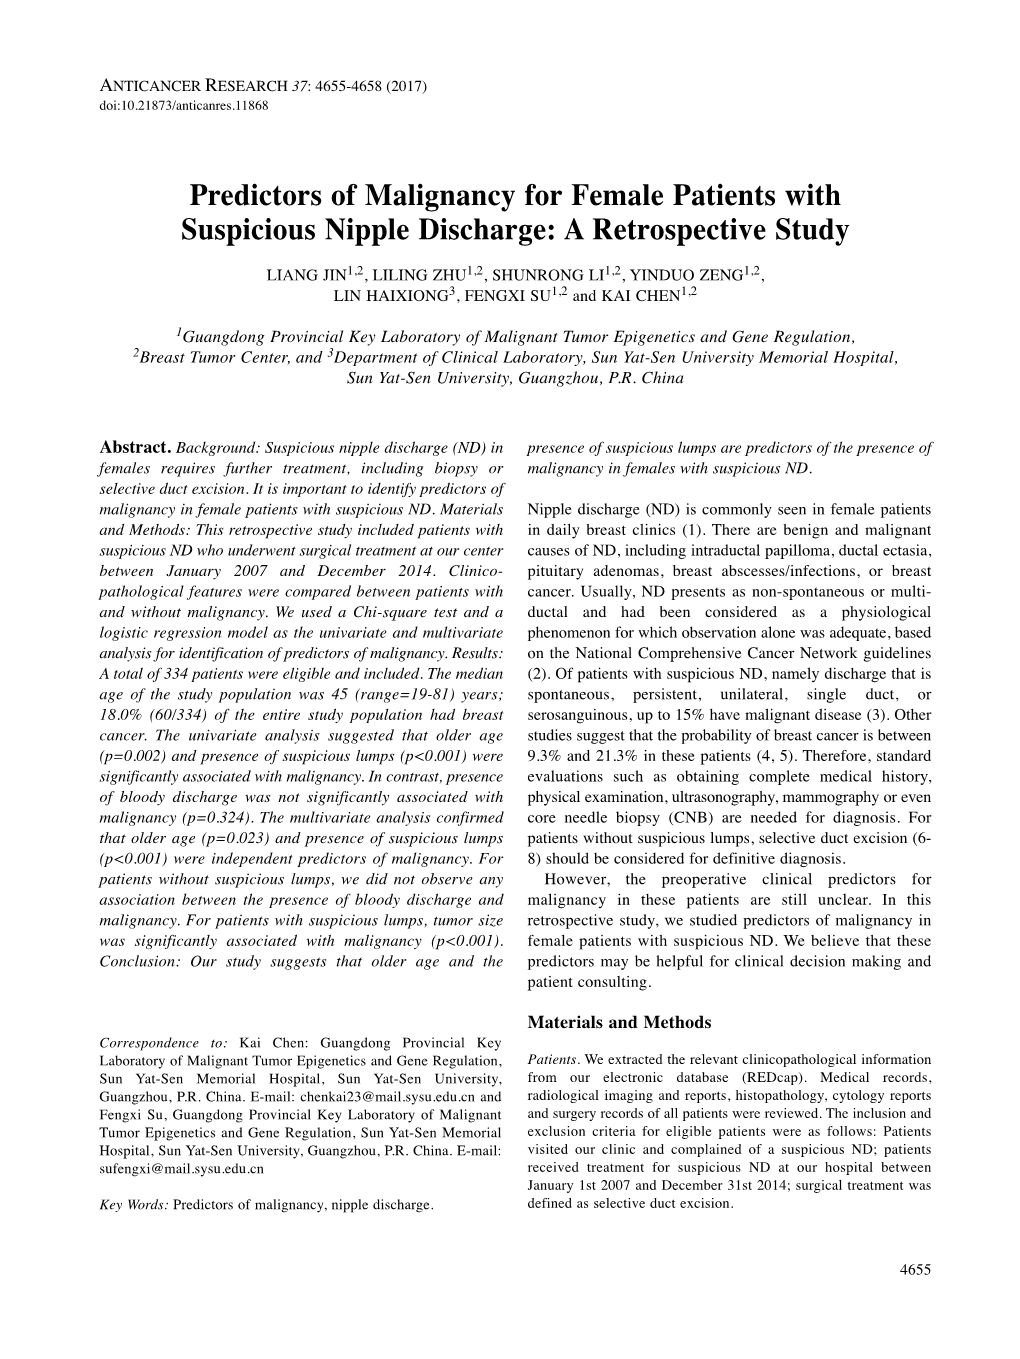 Predictors of Malignancy for Female Patients with Suspicious Nipple